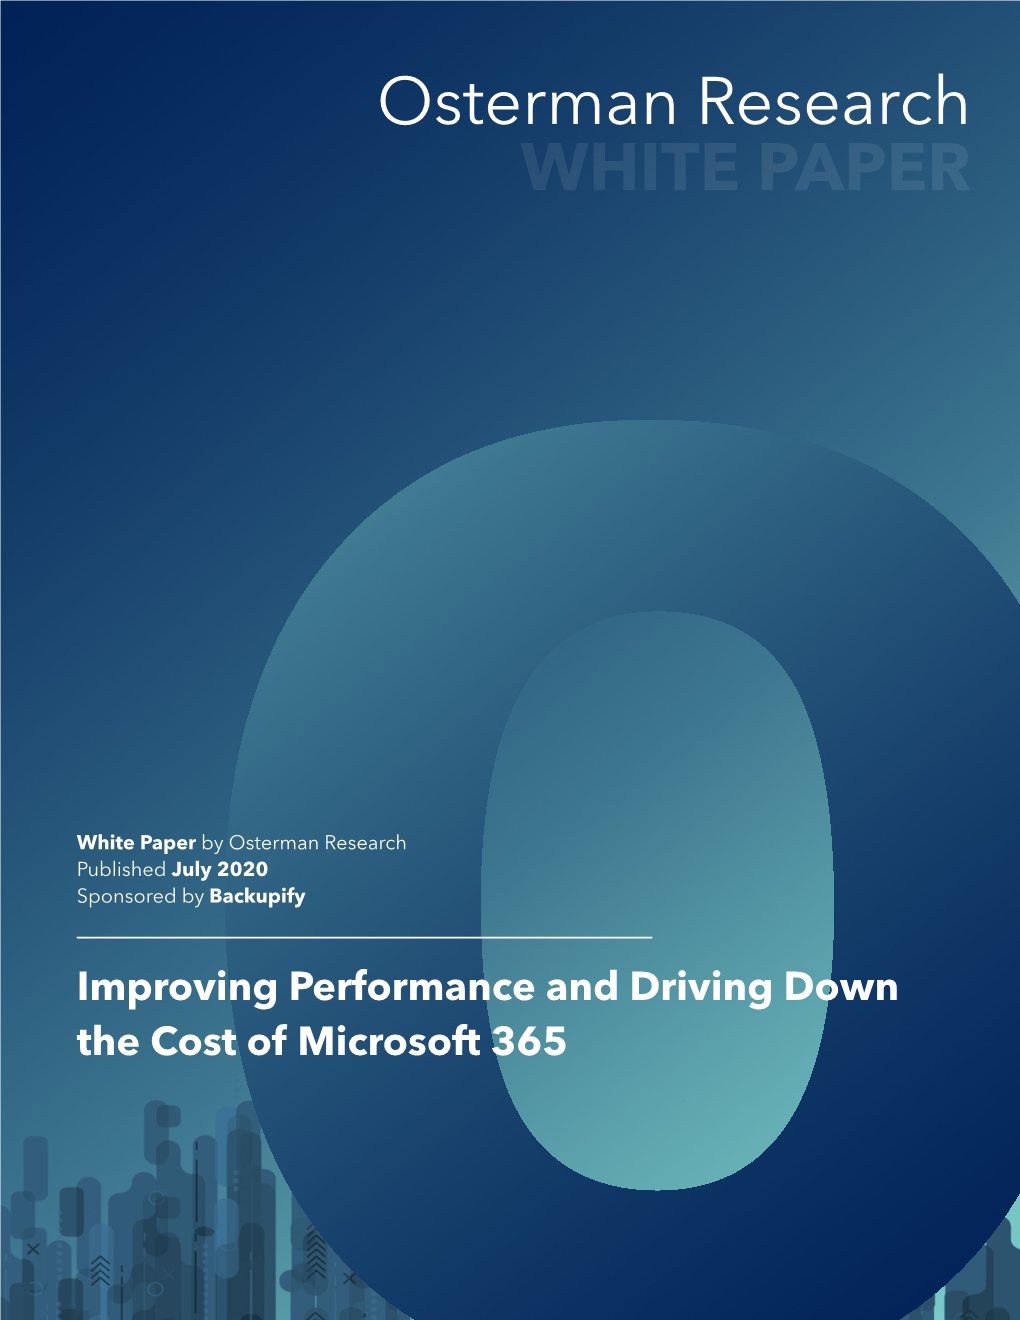 Improving Performance and Driving Down the Cost of Microsoft 365